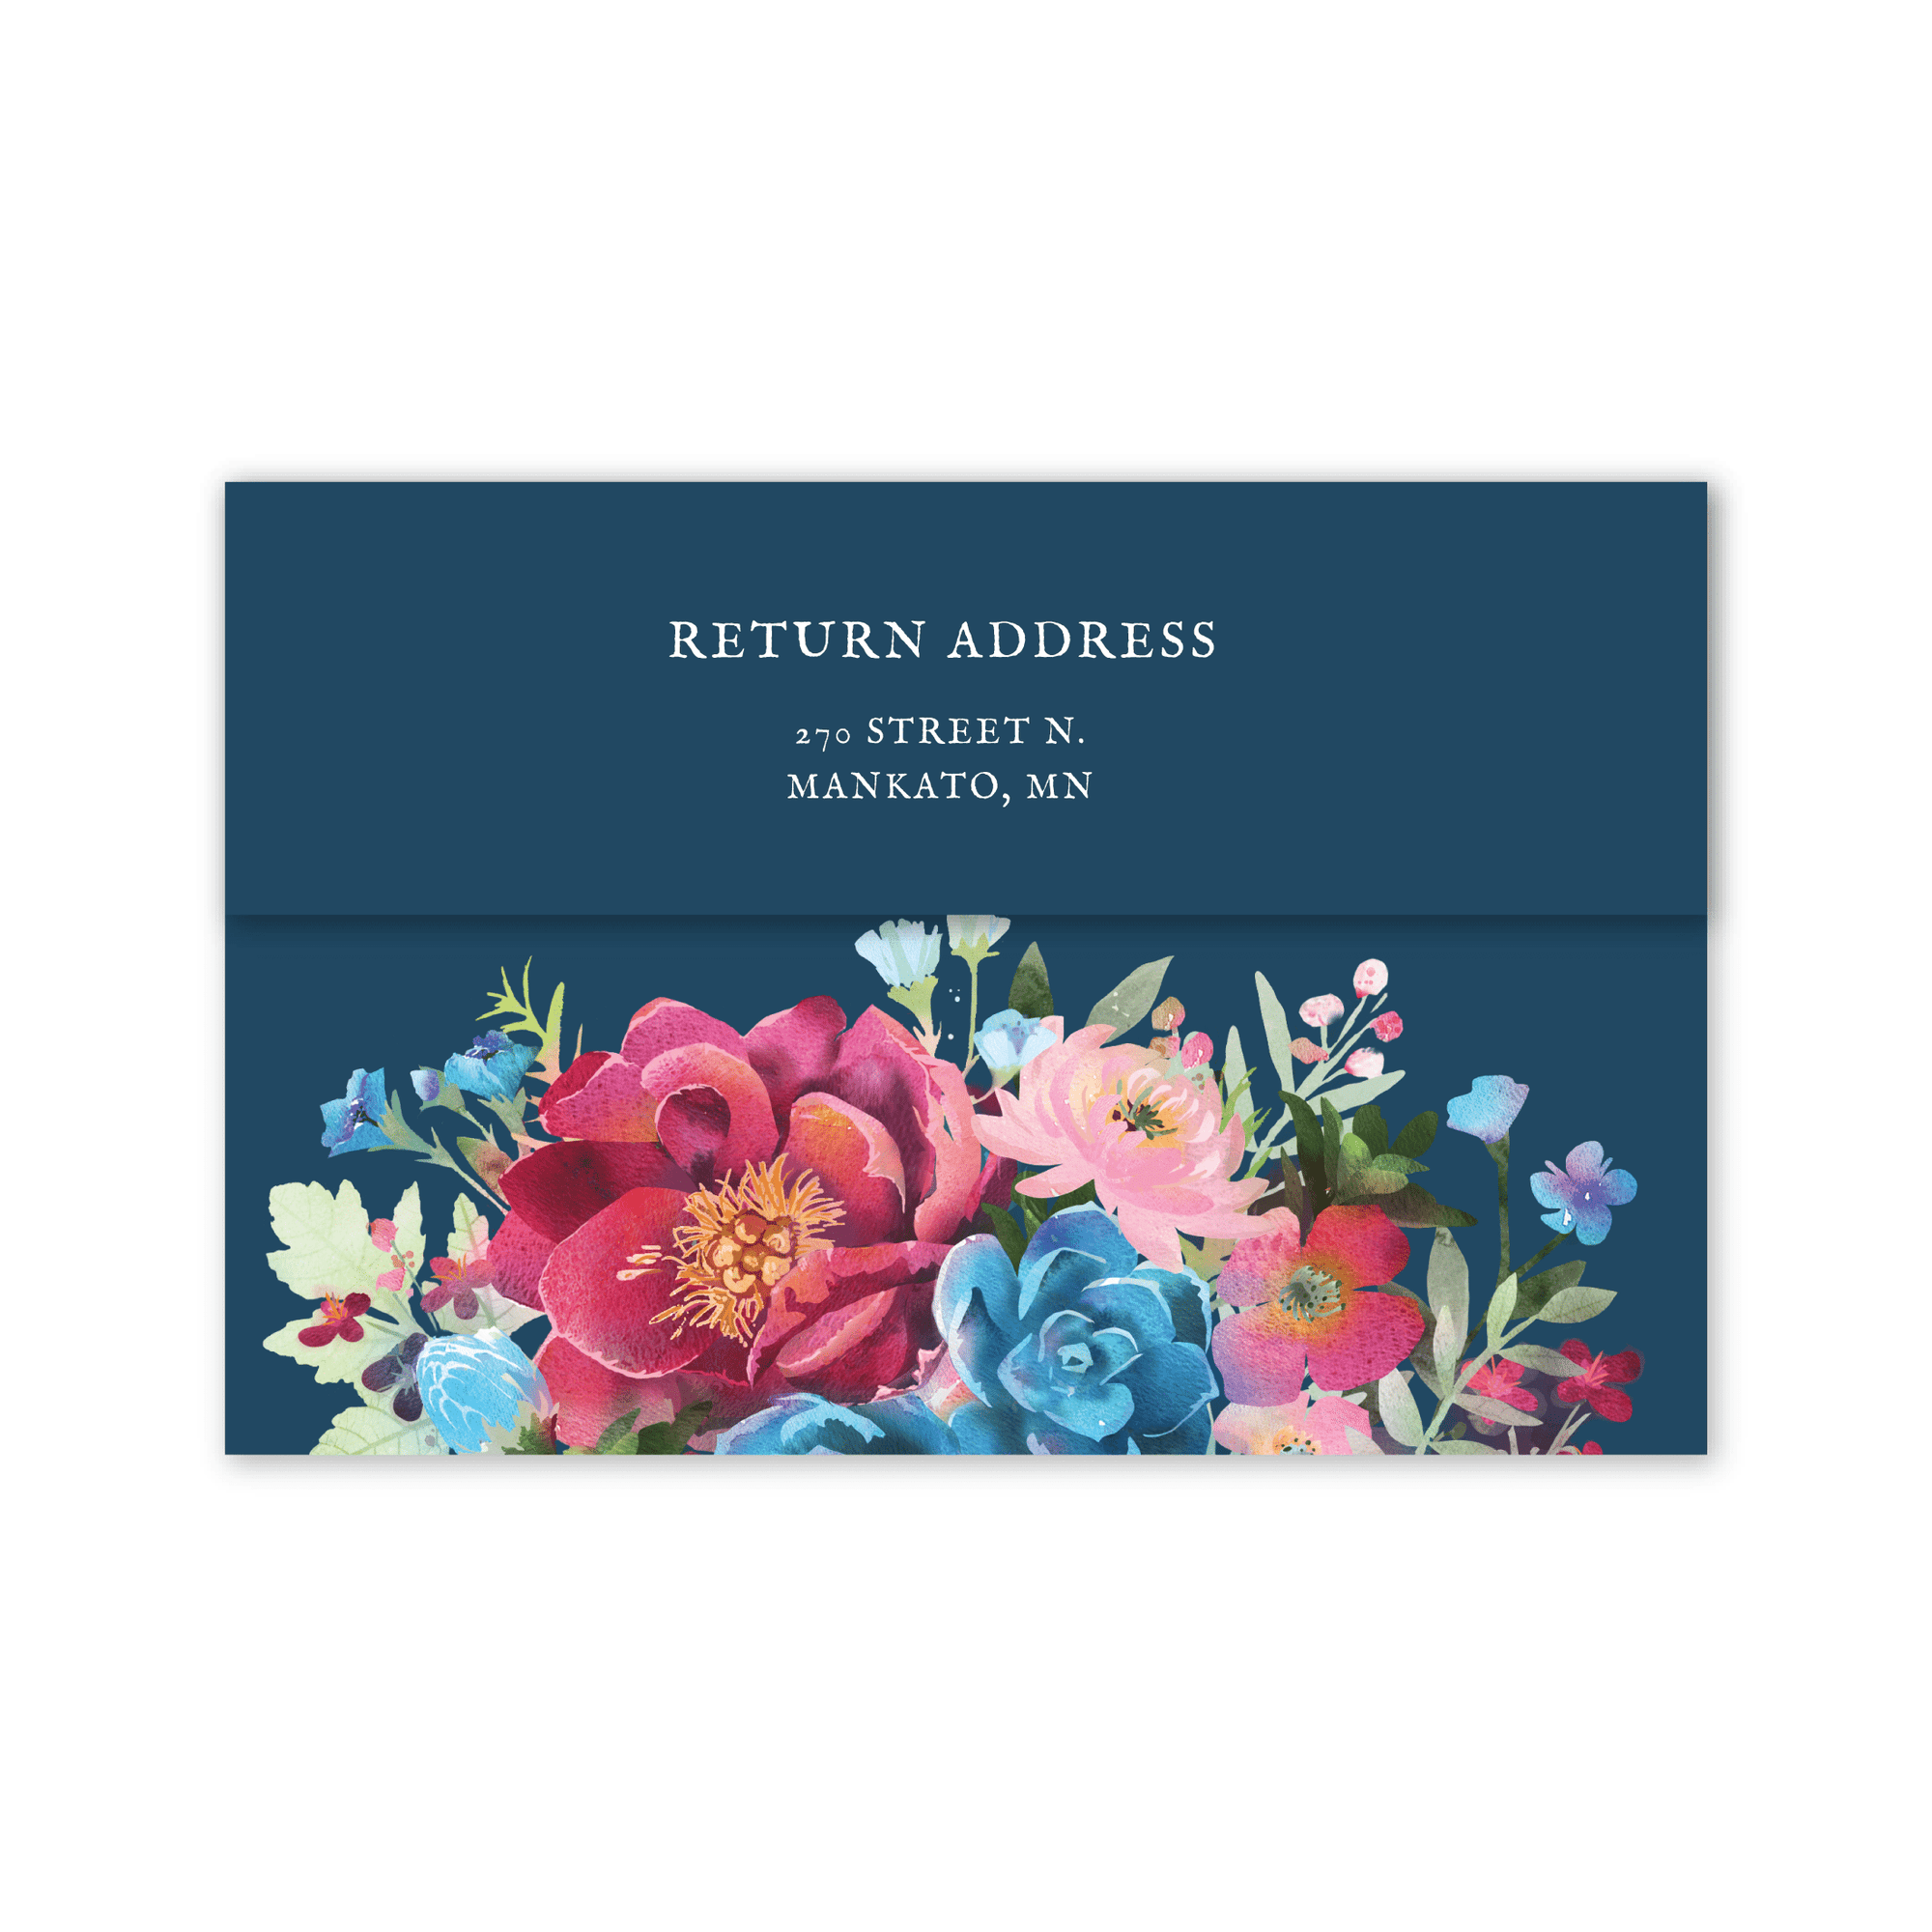 Woodland Floral All-in-One Wedding Invitation Gartner Studios All-in-One Wedding Invitation 98531